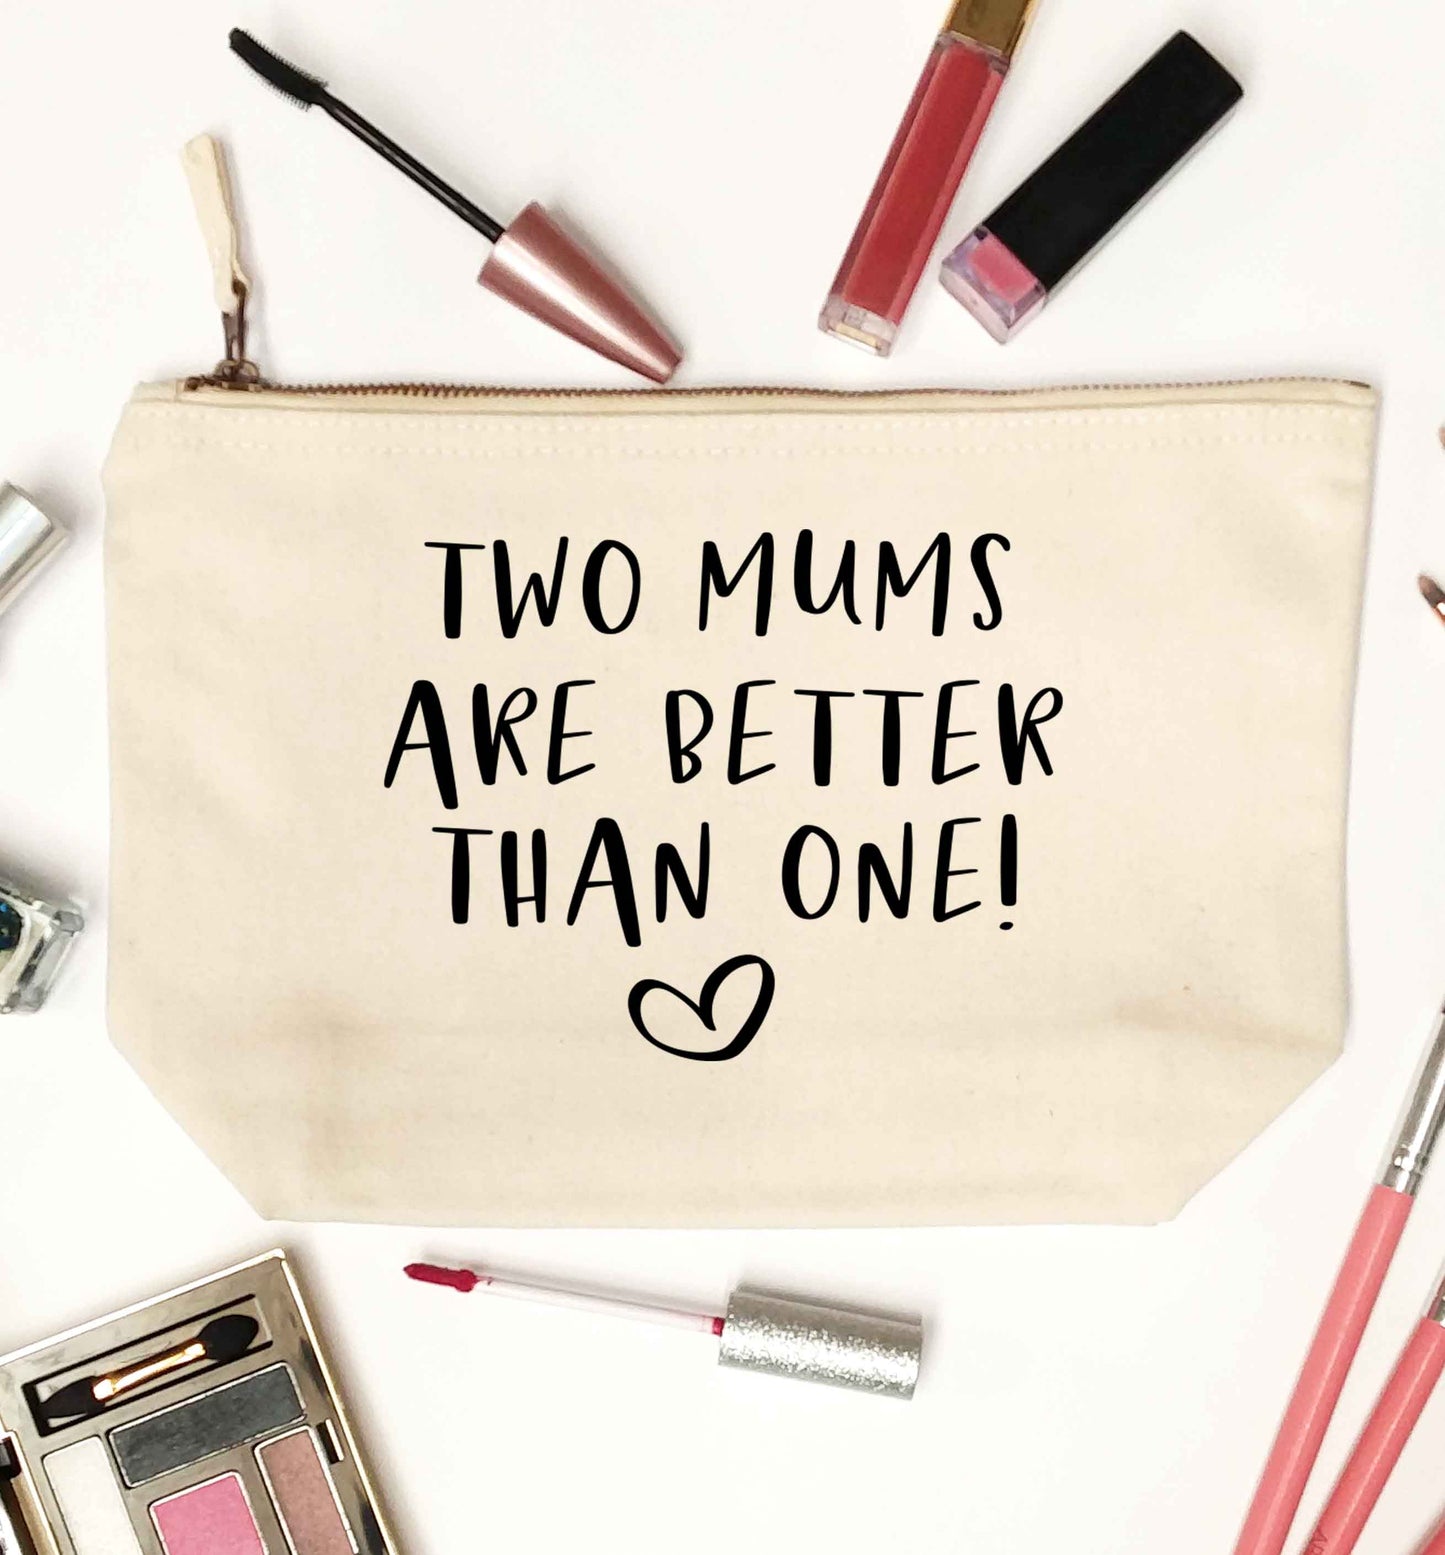 Two mums are better than one natural makeup bag